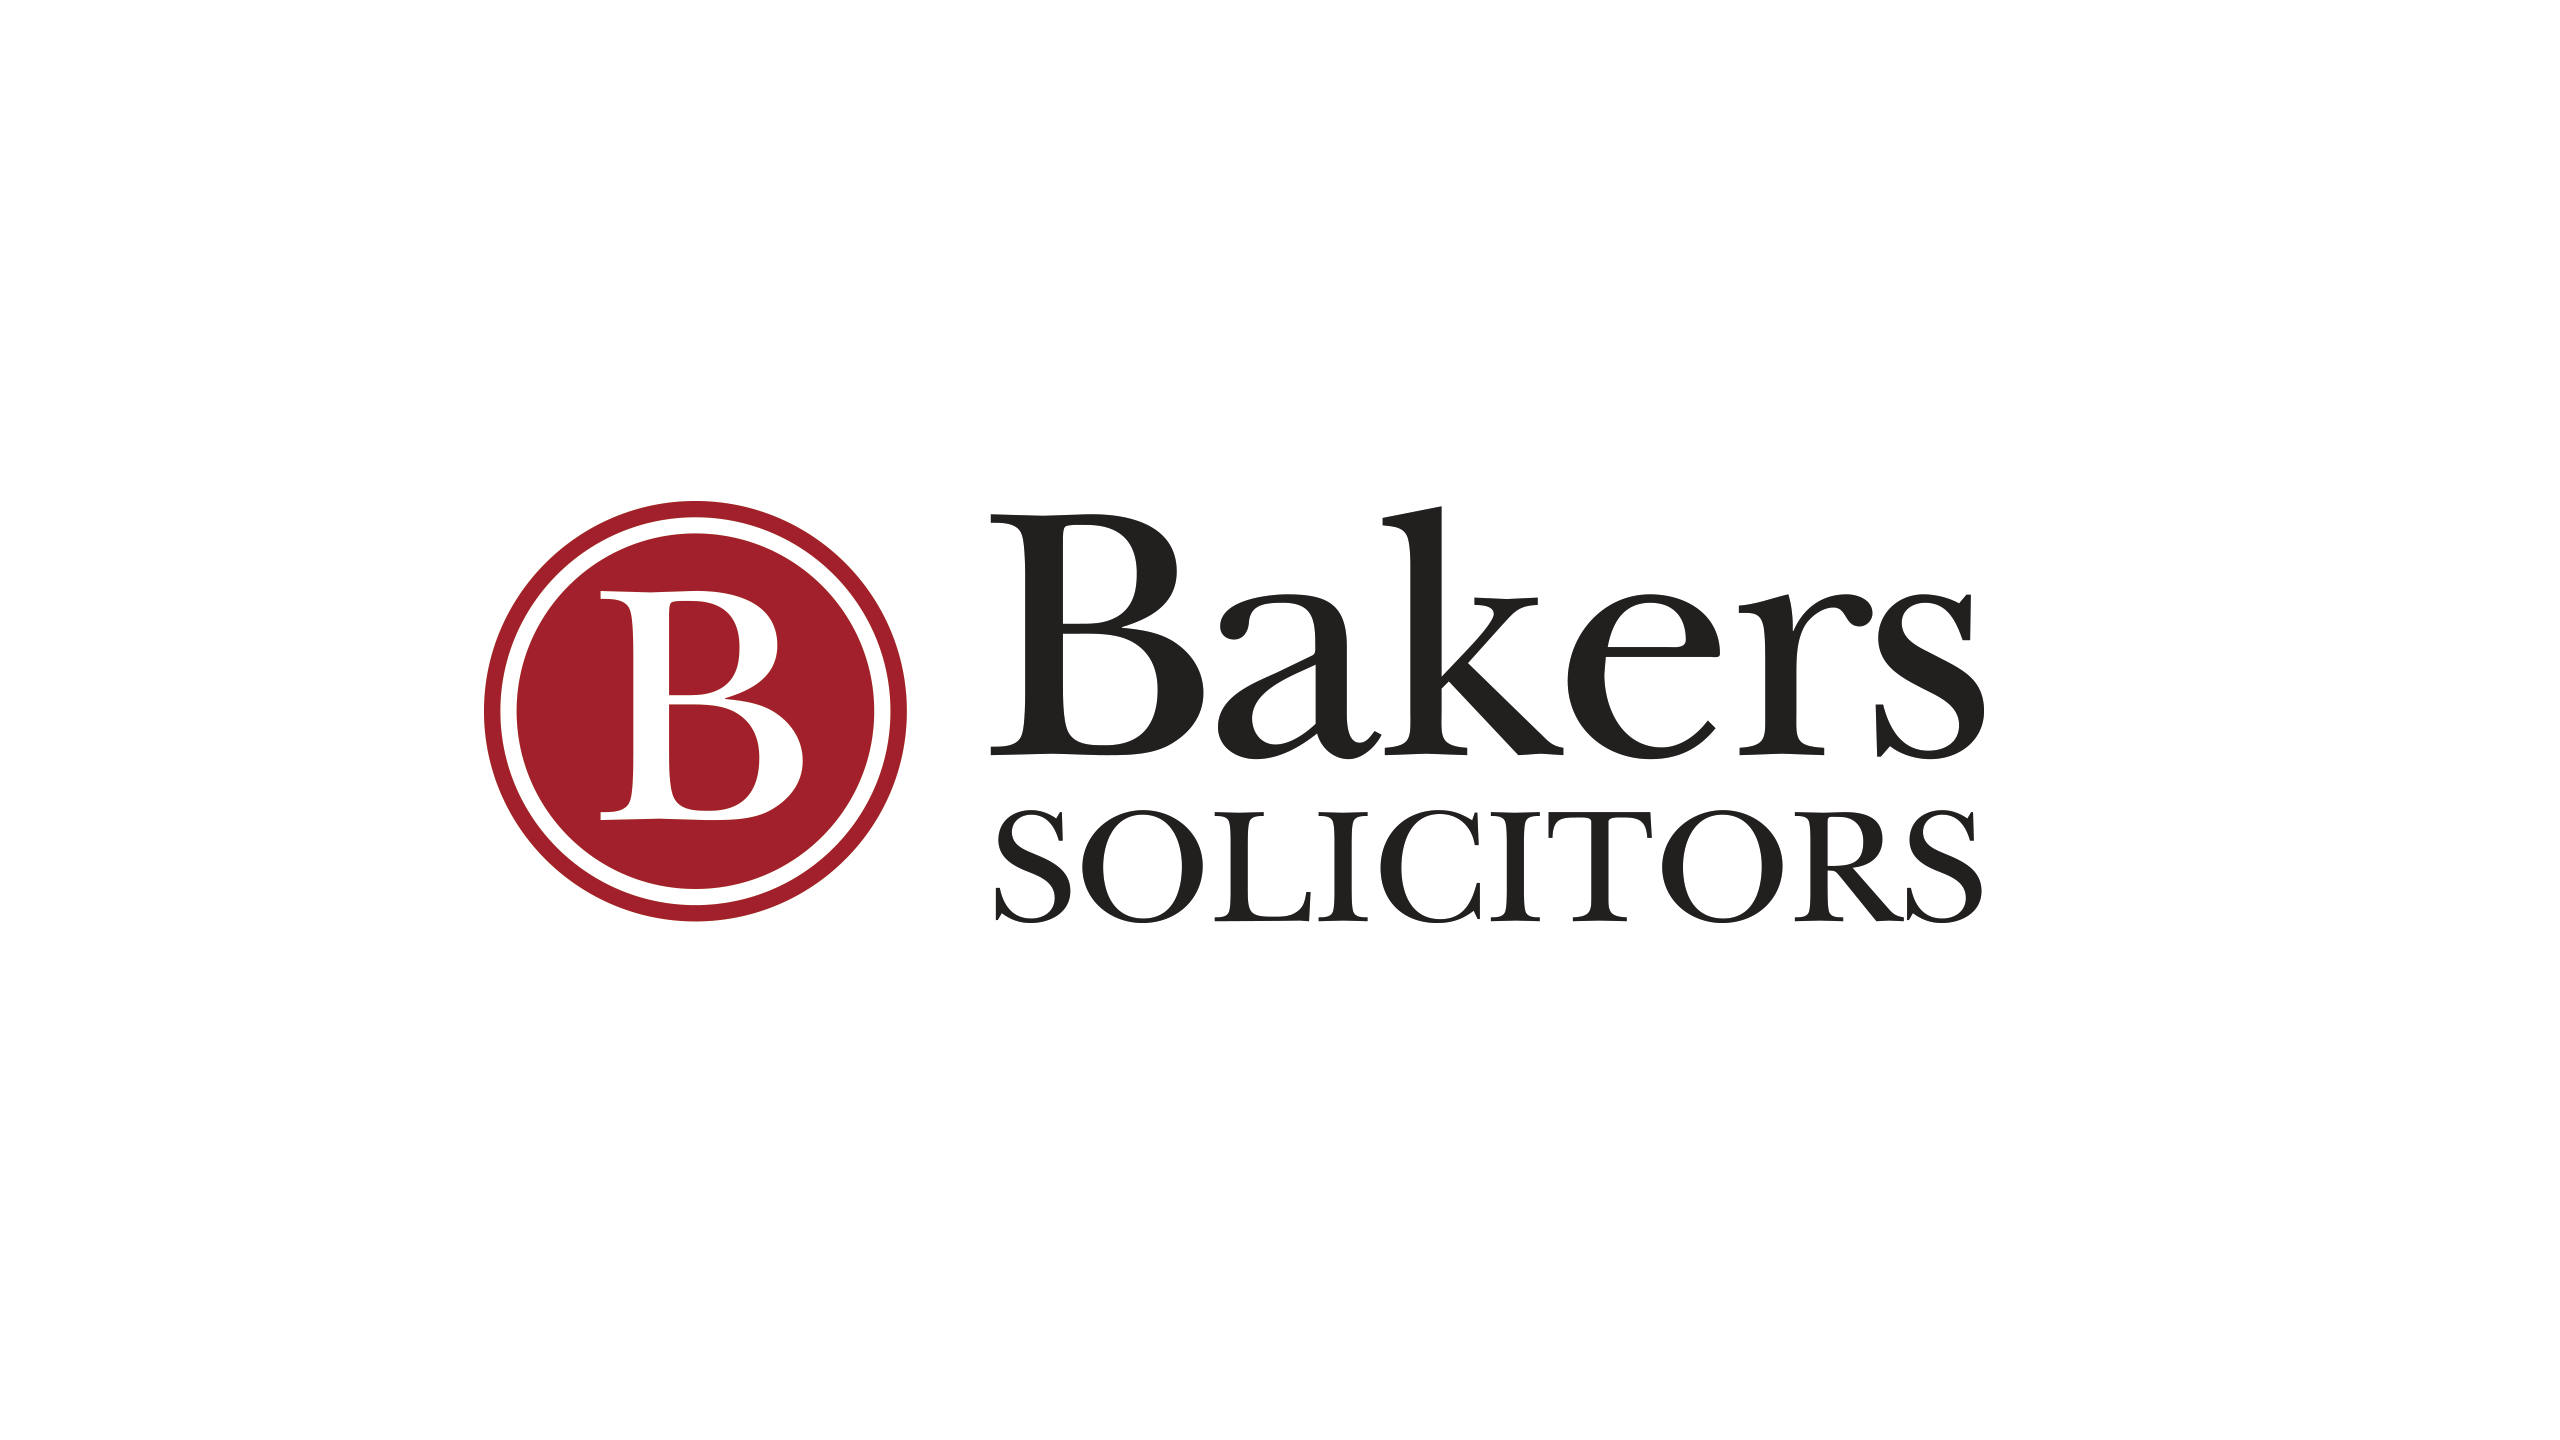 Bakers Solicitors - Contact Us - Bakers Solicitors